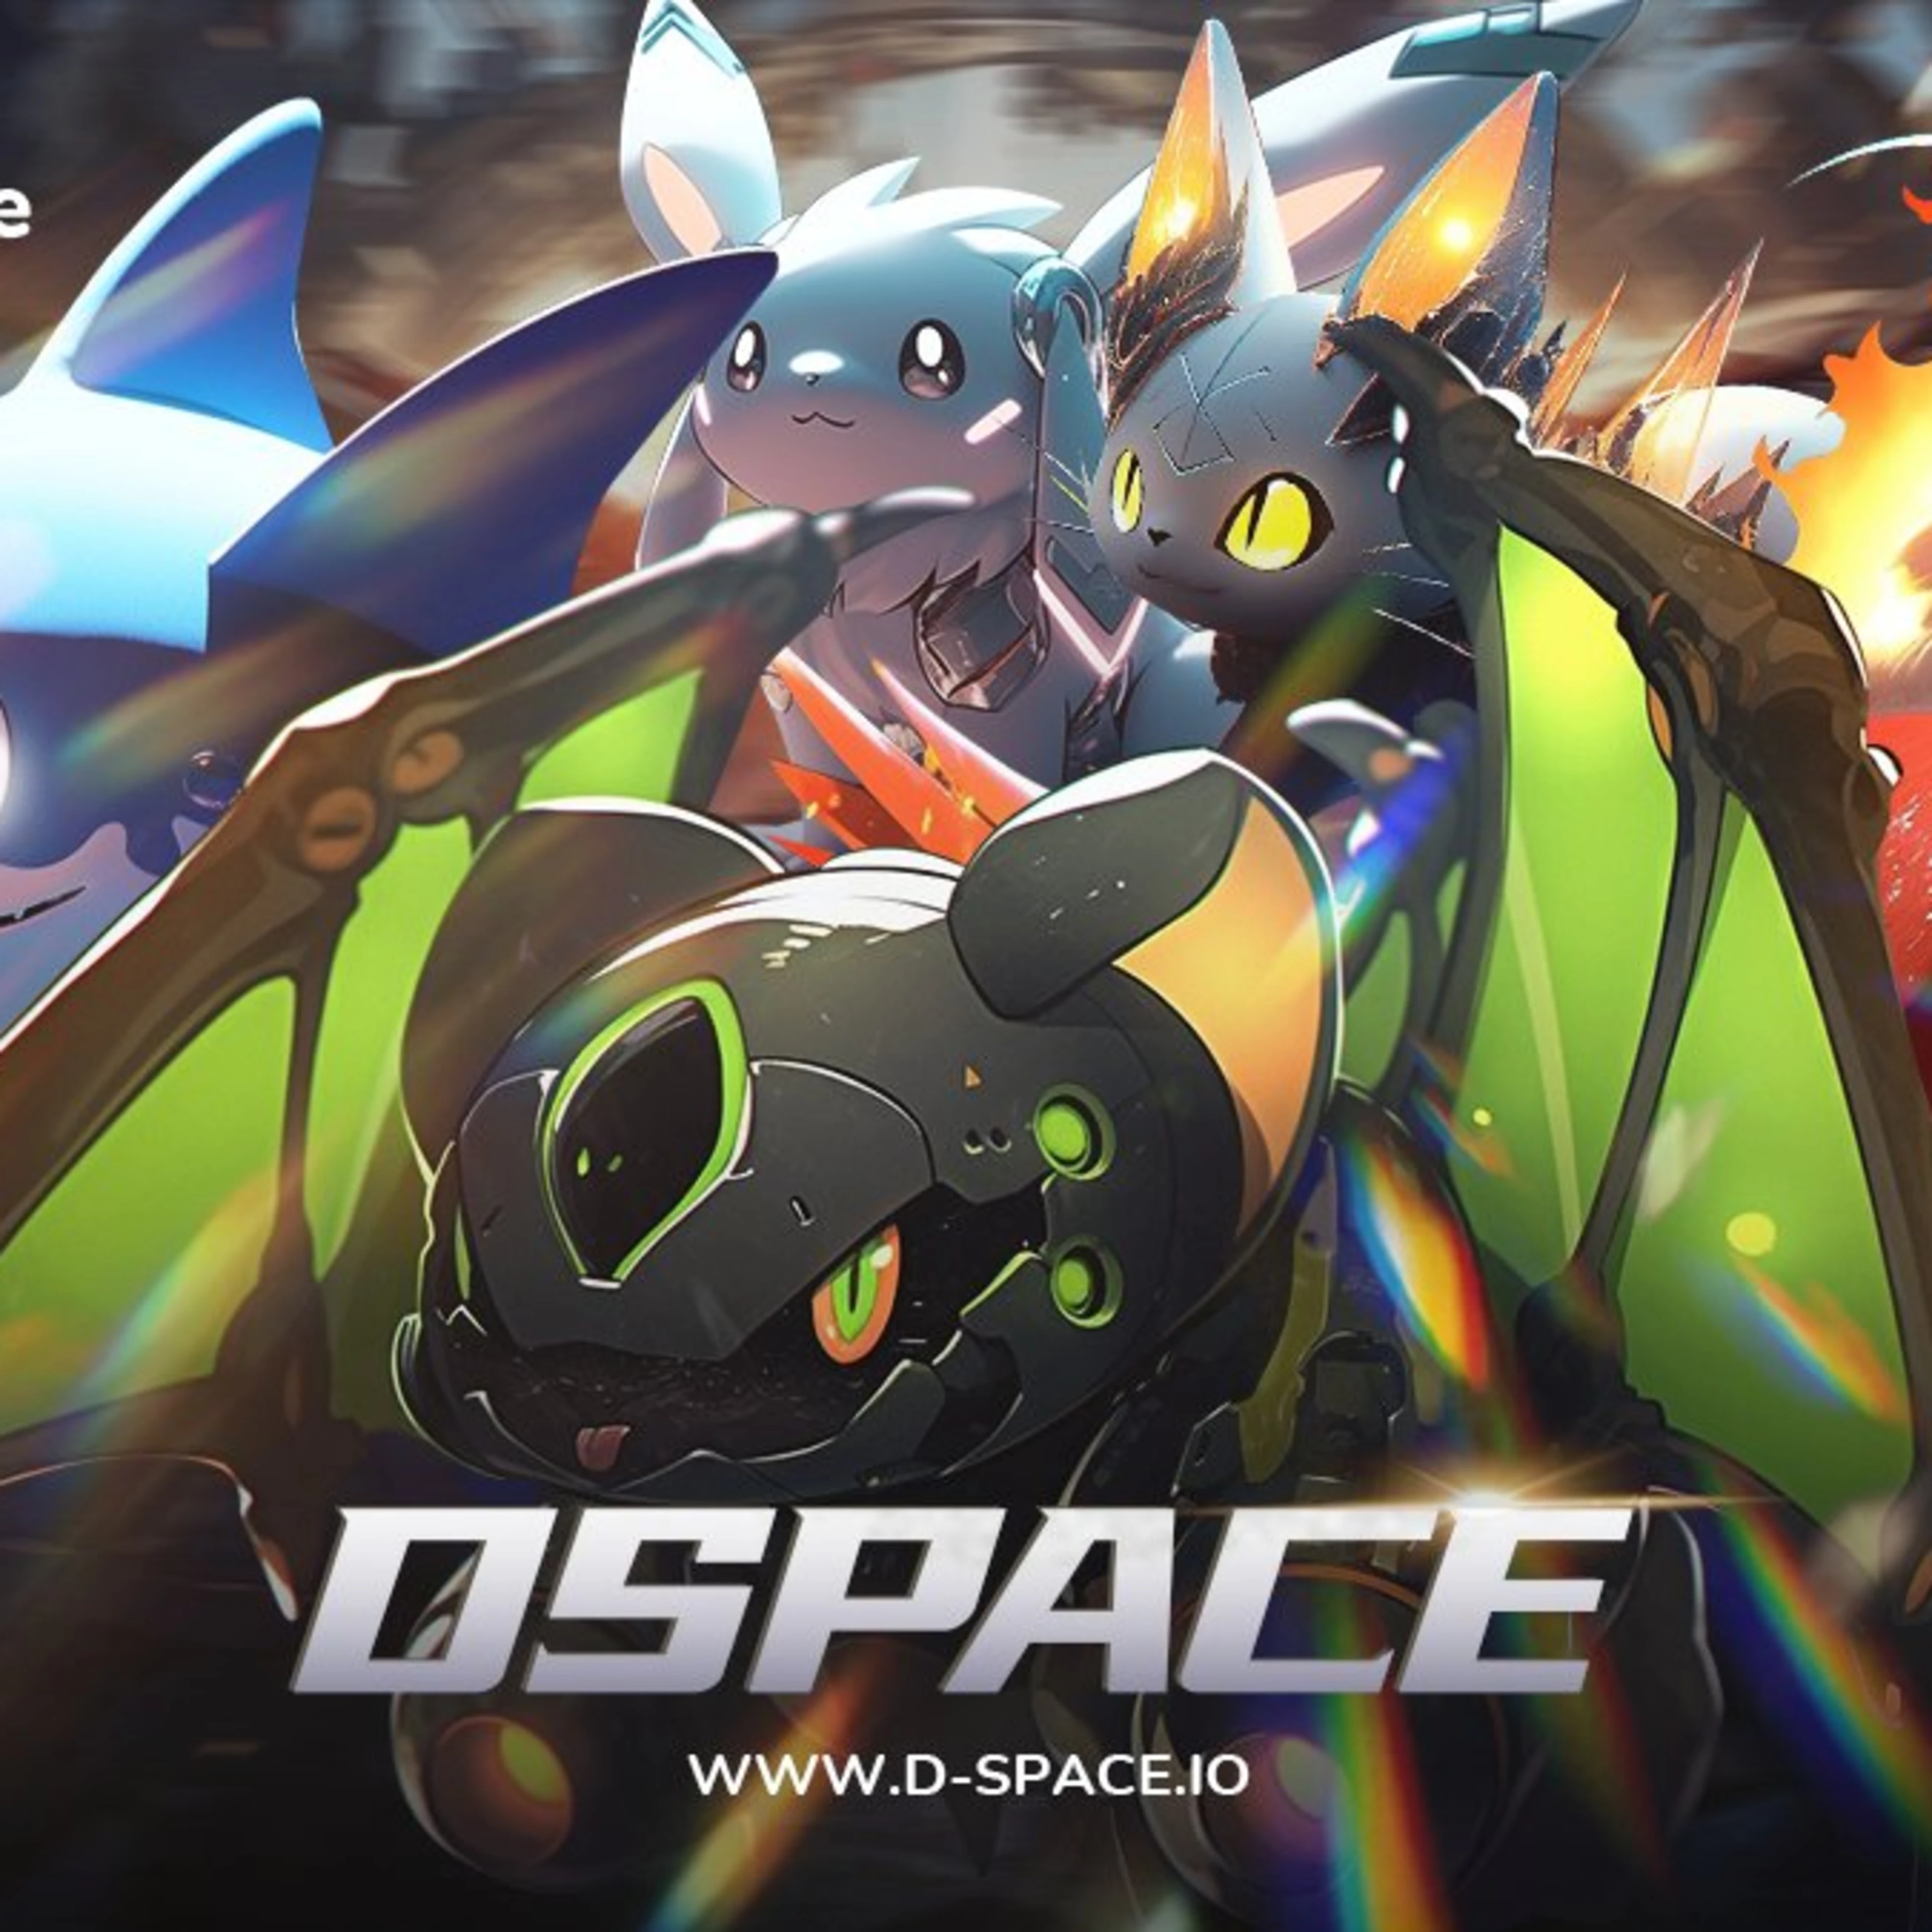 DSpace to Unveil Demo Video Showcasing AR & LBS Technology for their Social Protocol